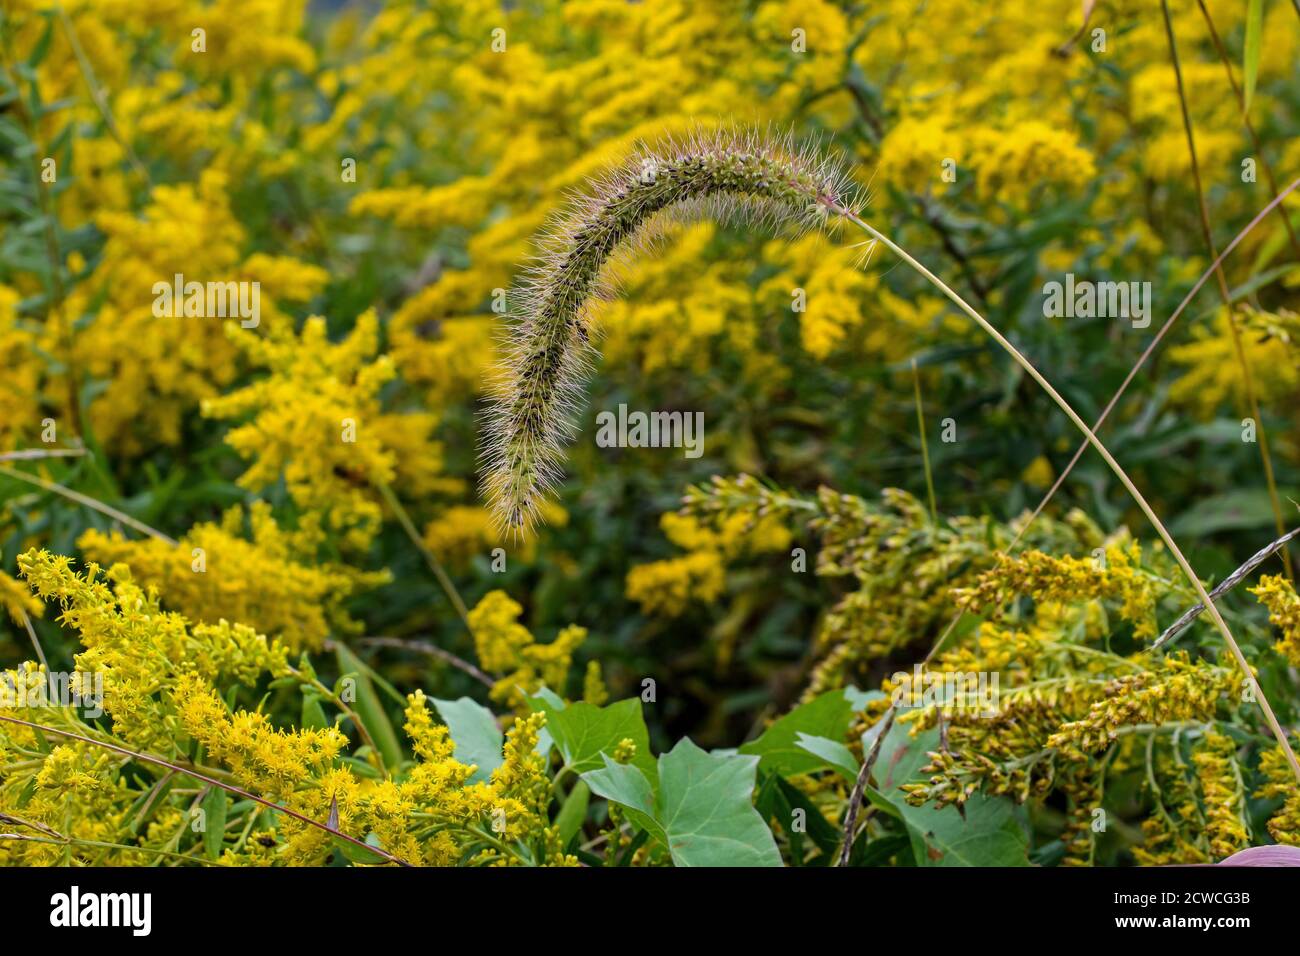 Japanese bristle-grass, nodding bristle-grass, Chinese foxtail, Chinese millet, giant-foxtail or nodding foxtail in field of goldenrod. Stock Photo